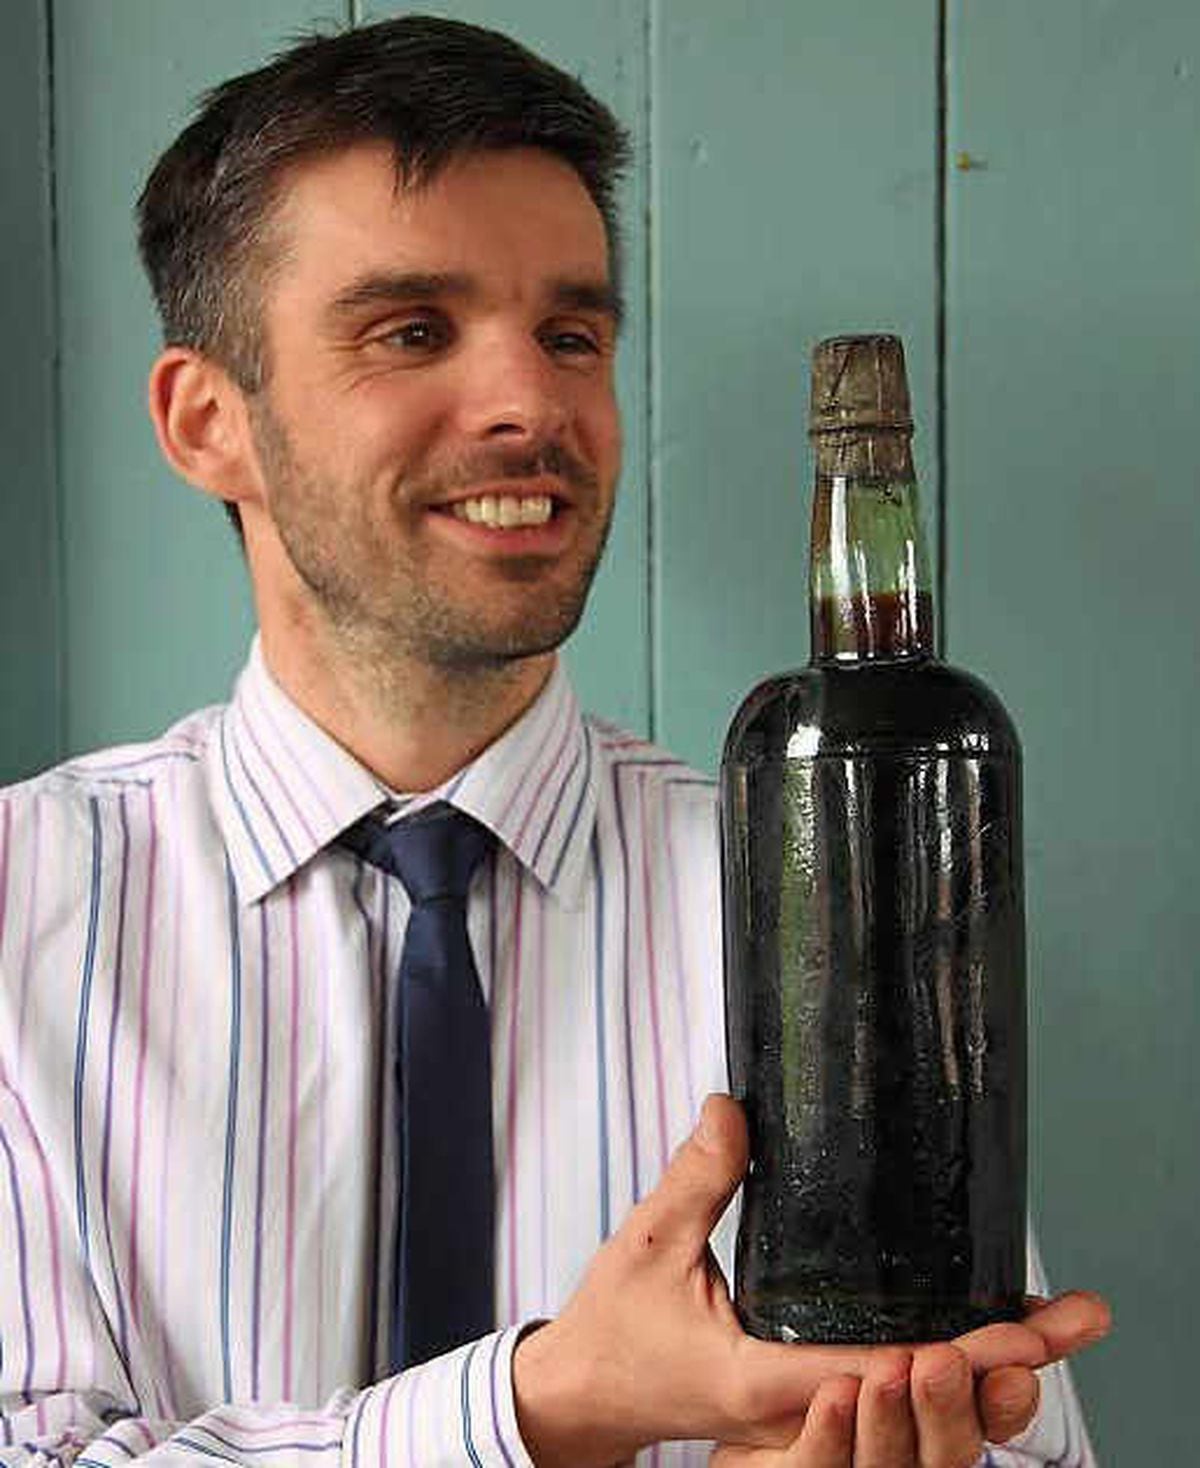 Aaron Dean with the bottle